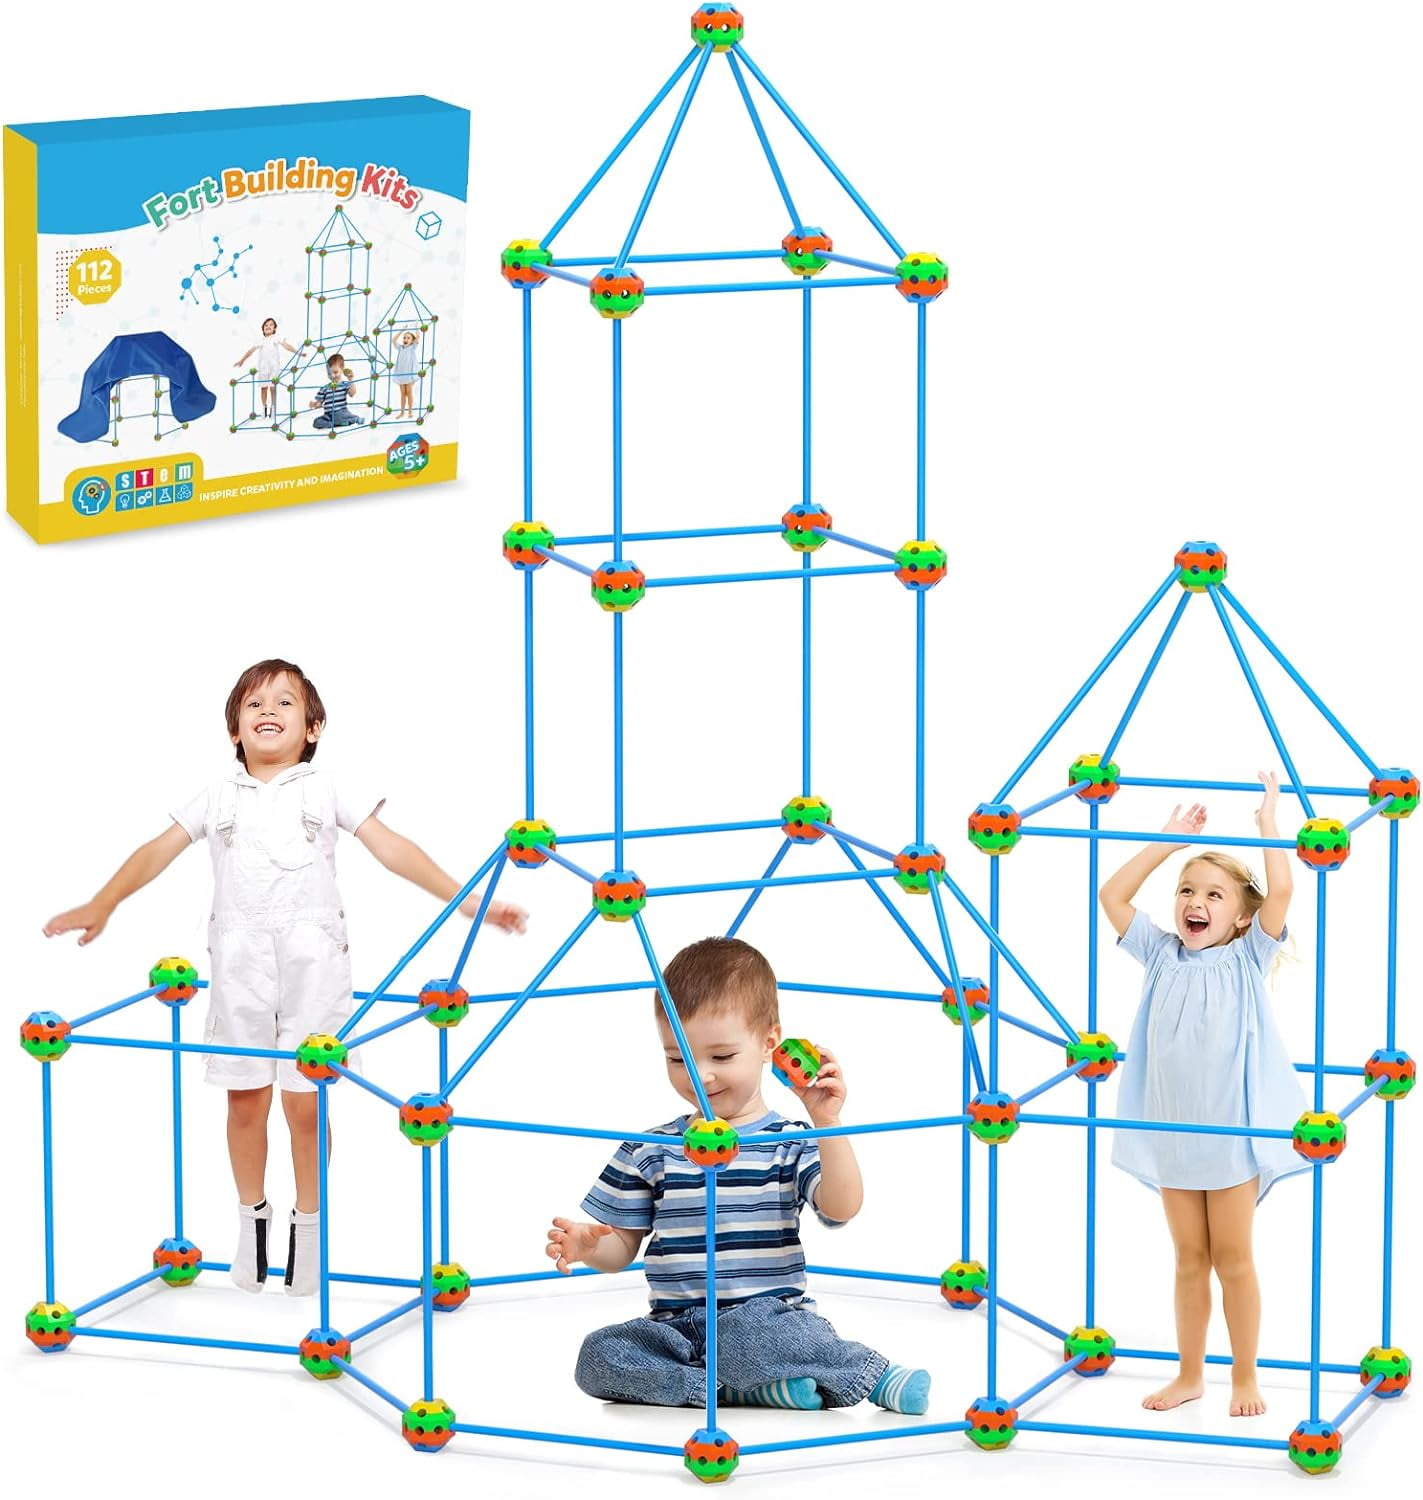 112 Pcs Fort Building Kit for Kids, Tecboss Construction STEM Building Toys  for 4-12 Year Kids Builder Gifts with a Blanket to DIY Building Castles  Tunnels Play Tent Rocket Tower Indoor 